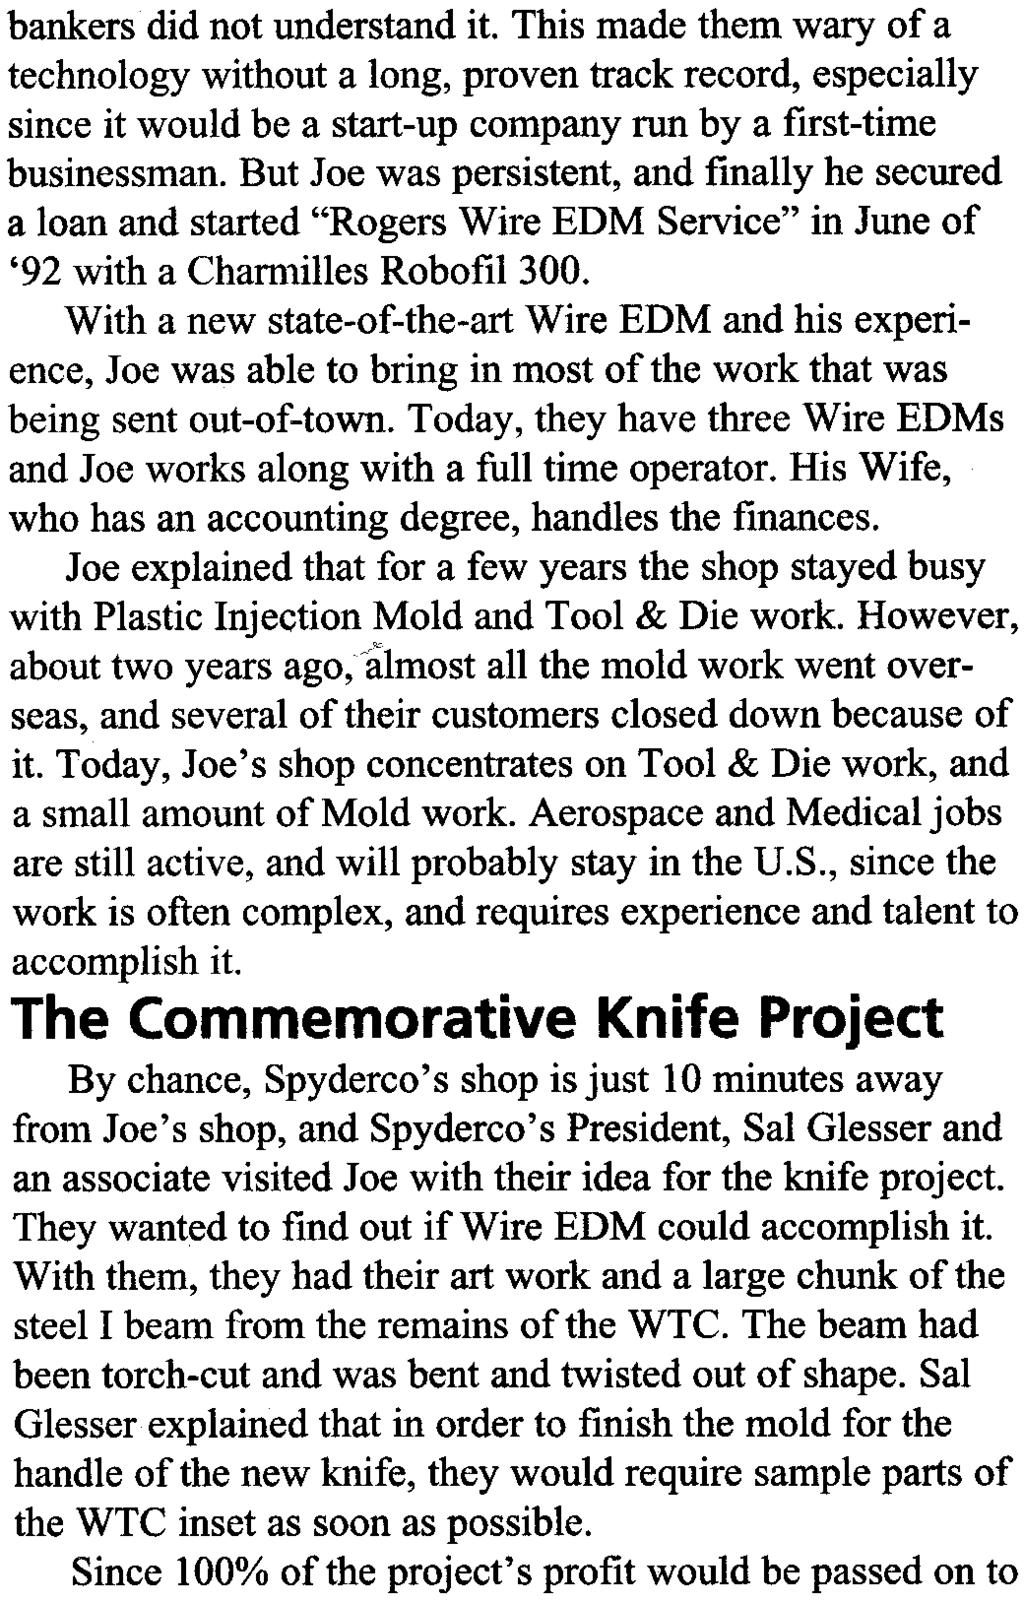 With a new state-of-the-art Wire EDM and his experience, Joe was able to bring in most of the work that was being sent out-of-town.